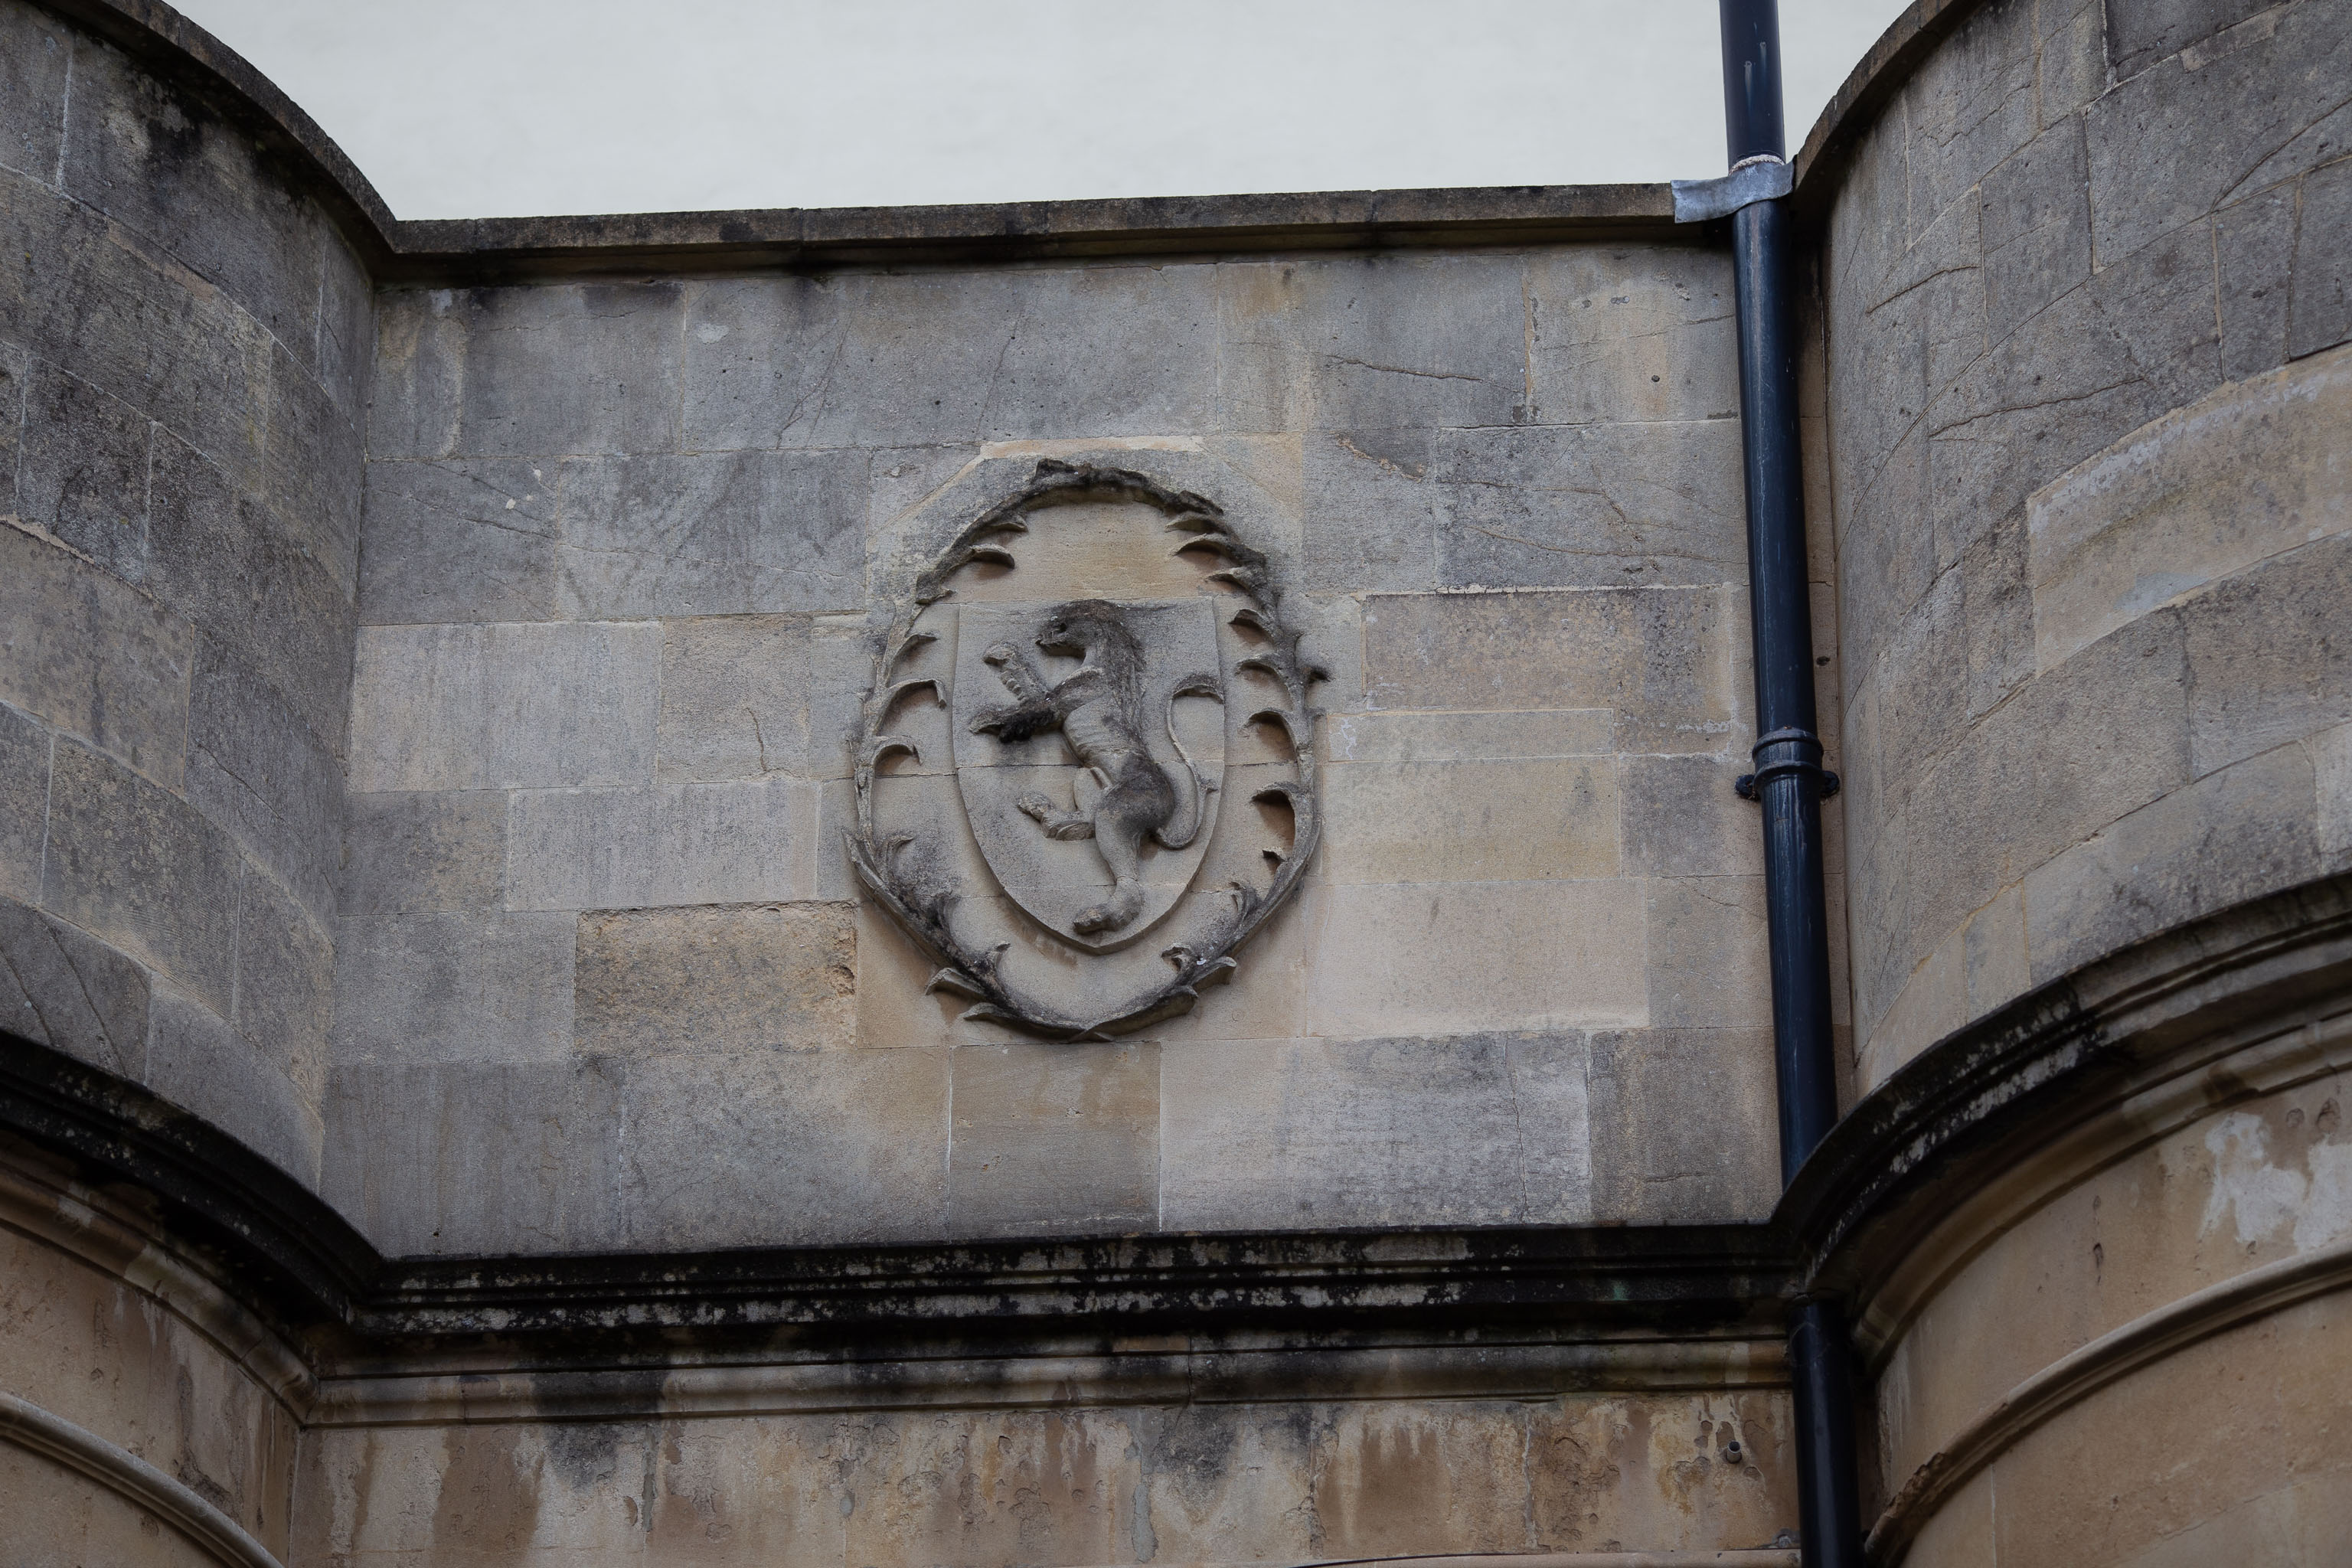 Lion
Number 16 The Paragon lies on the other side of the street from the main terrace. It's grade II listed and has "a raised shield to the attic with a...